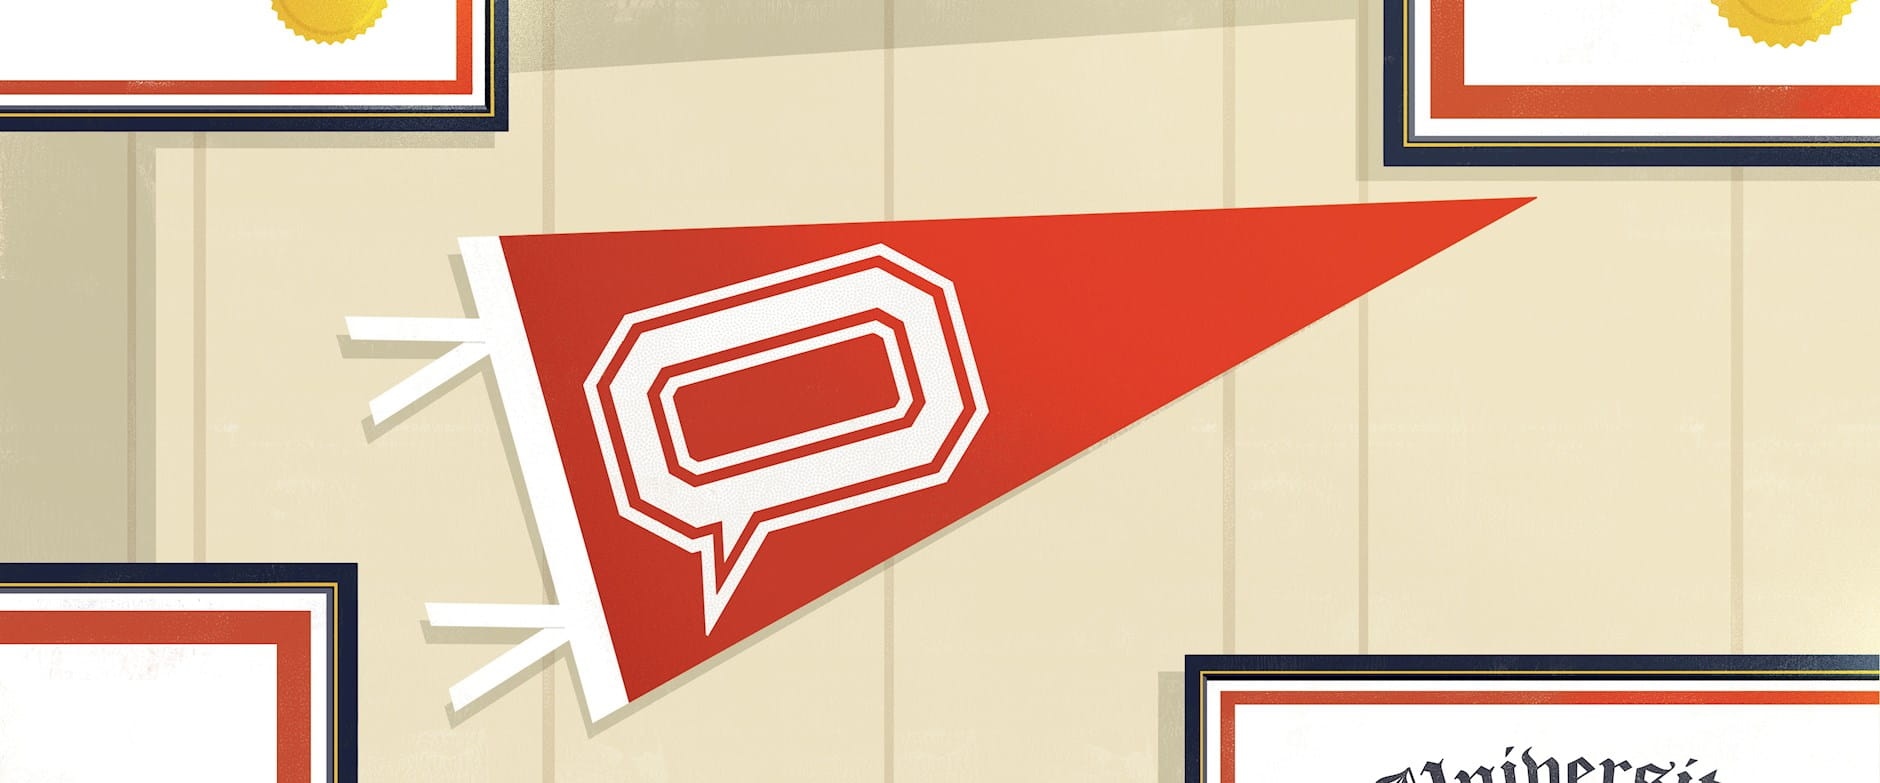 Digital illustration of red college pennant on a wall